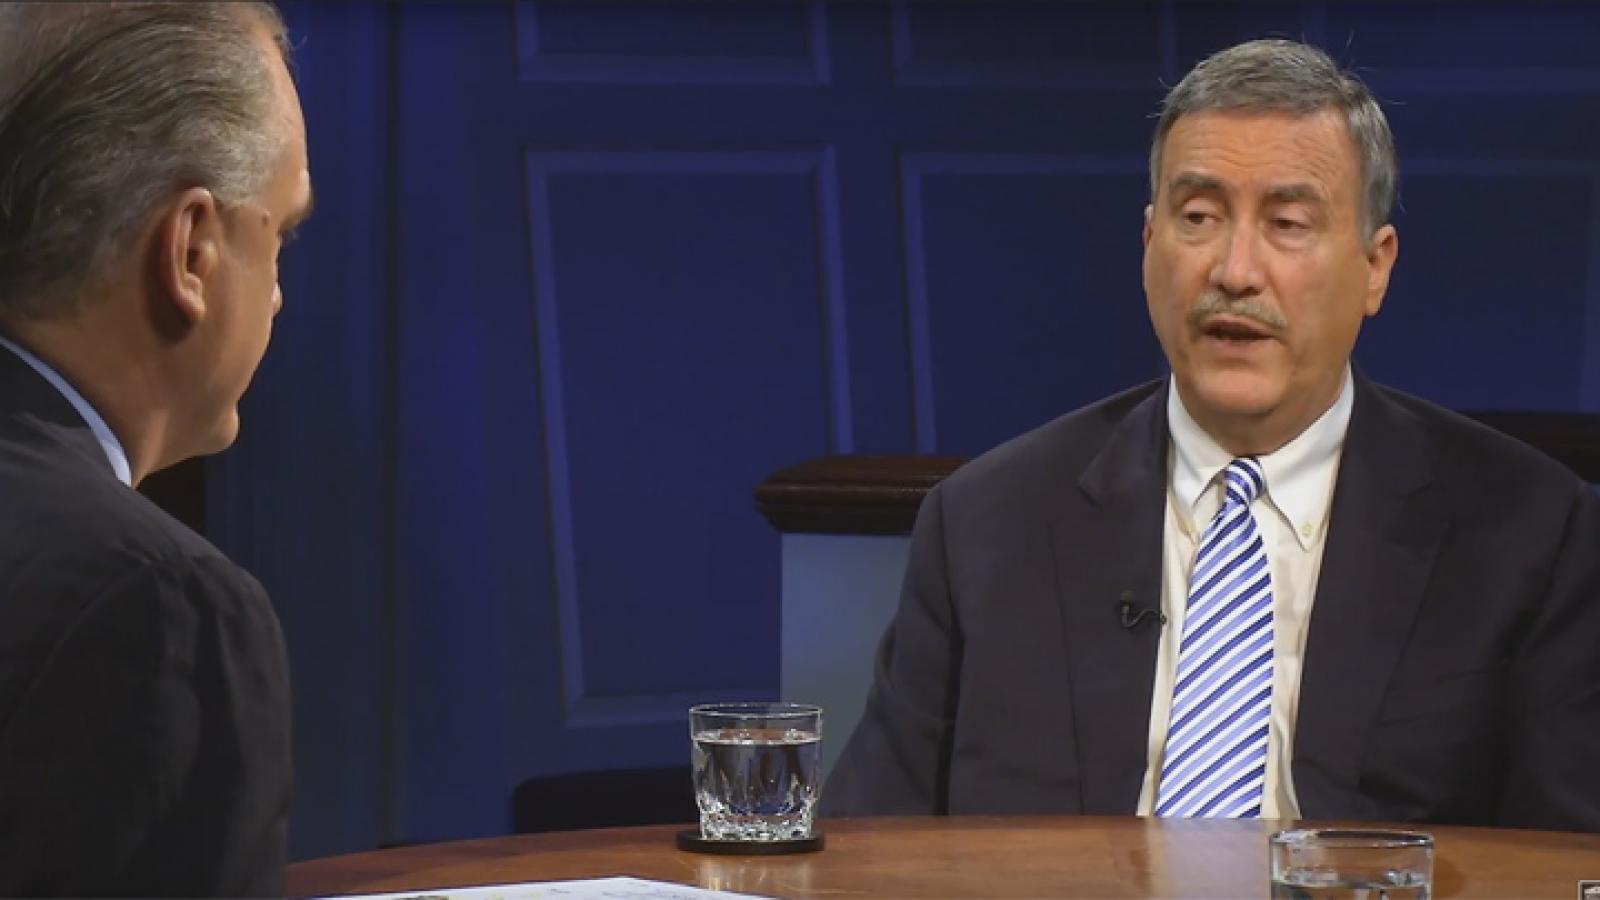 UVA's noted political prognosticator, Larry Sabato, describes what must happen for Donald Trump to win the 2016 presidential election